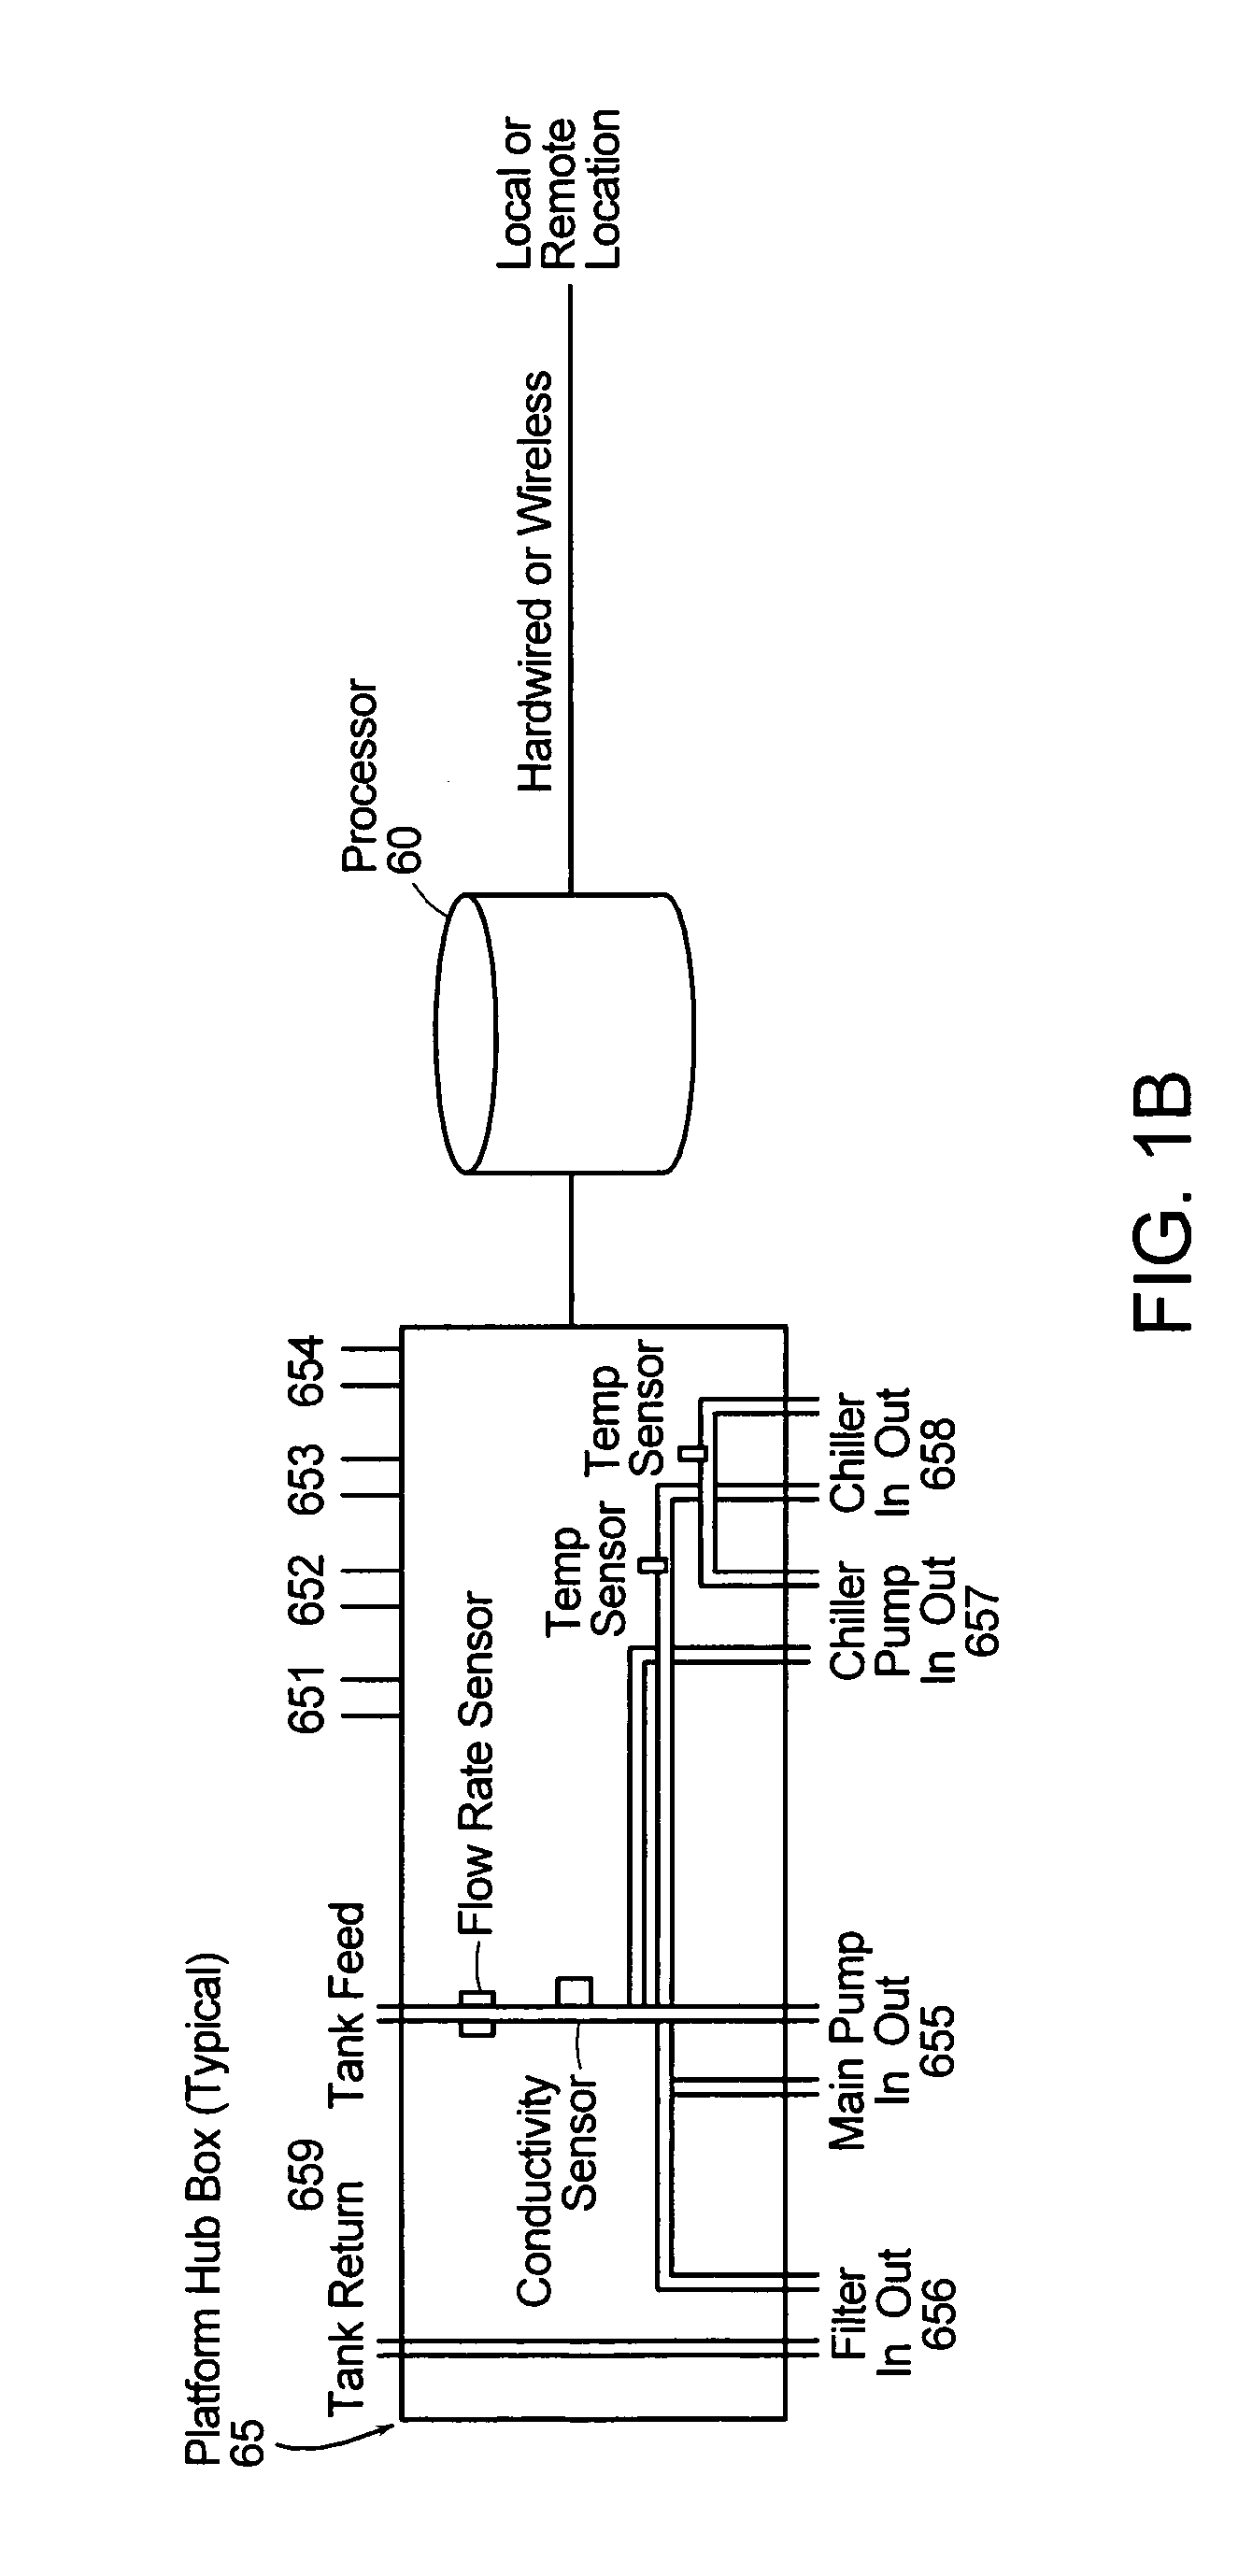 System and method for monitoring and controlling an aquatic environment